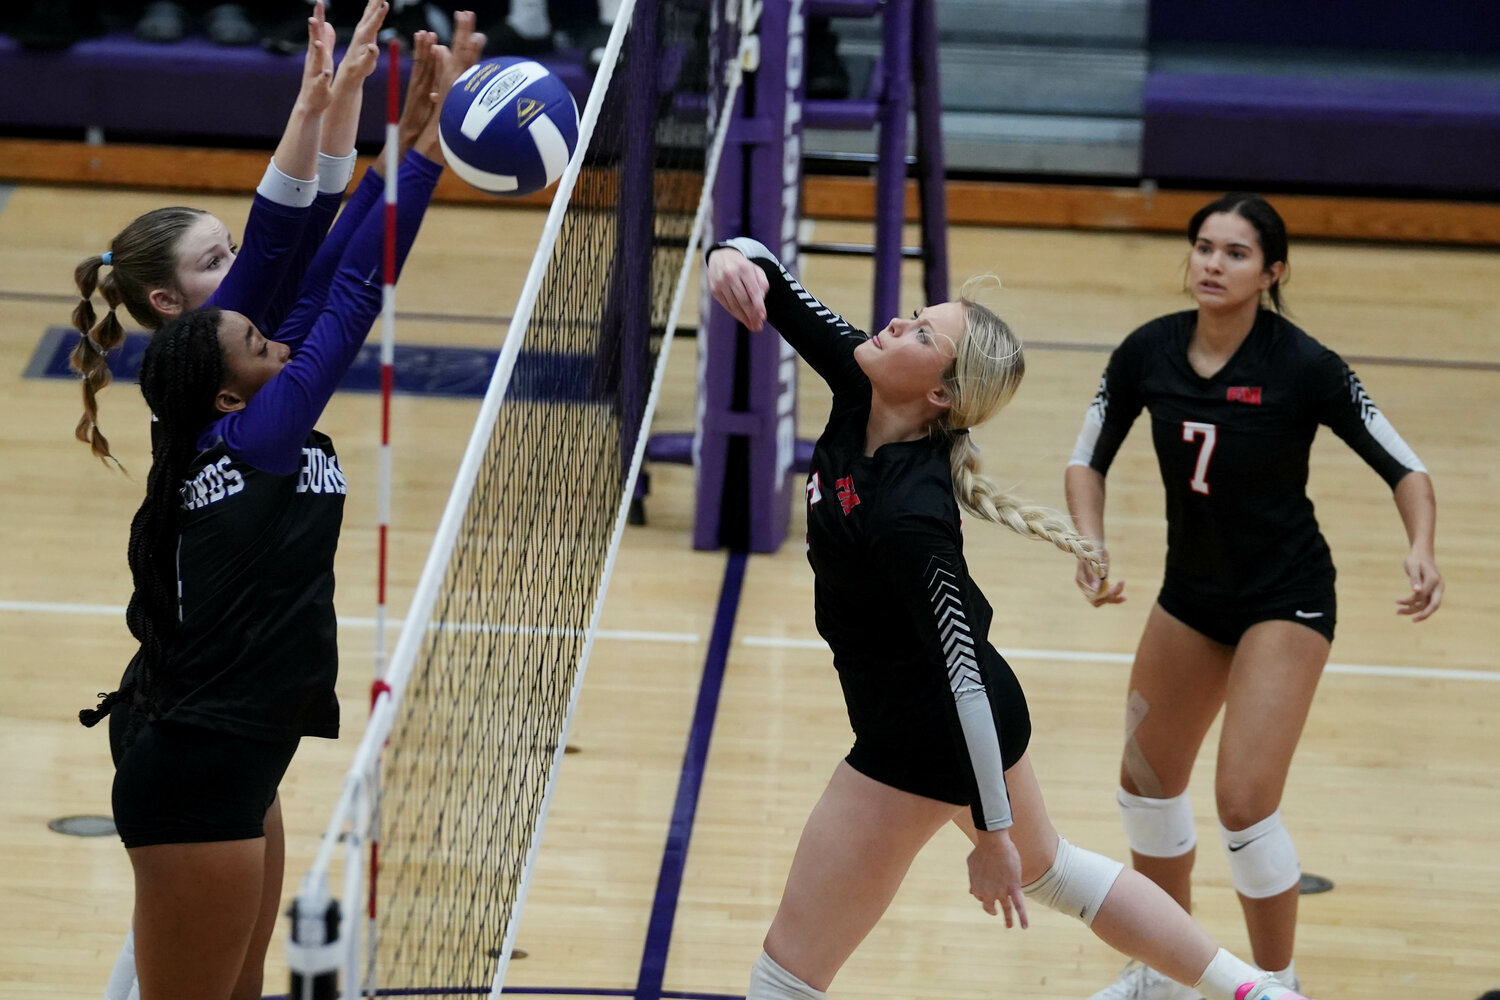 Fort Madison High School's Taylor Johnson (5) puts the ball over the net during the second set of their match against Burlington High School, Tuesday, September 26 at Burlington's Carl Johannsen Gymnasium.